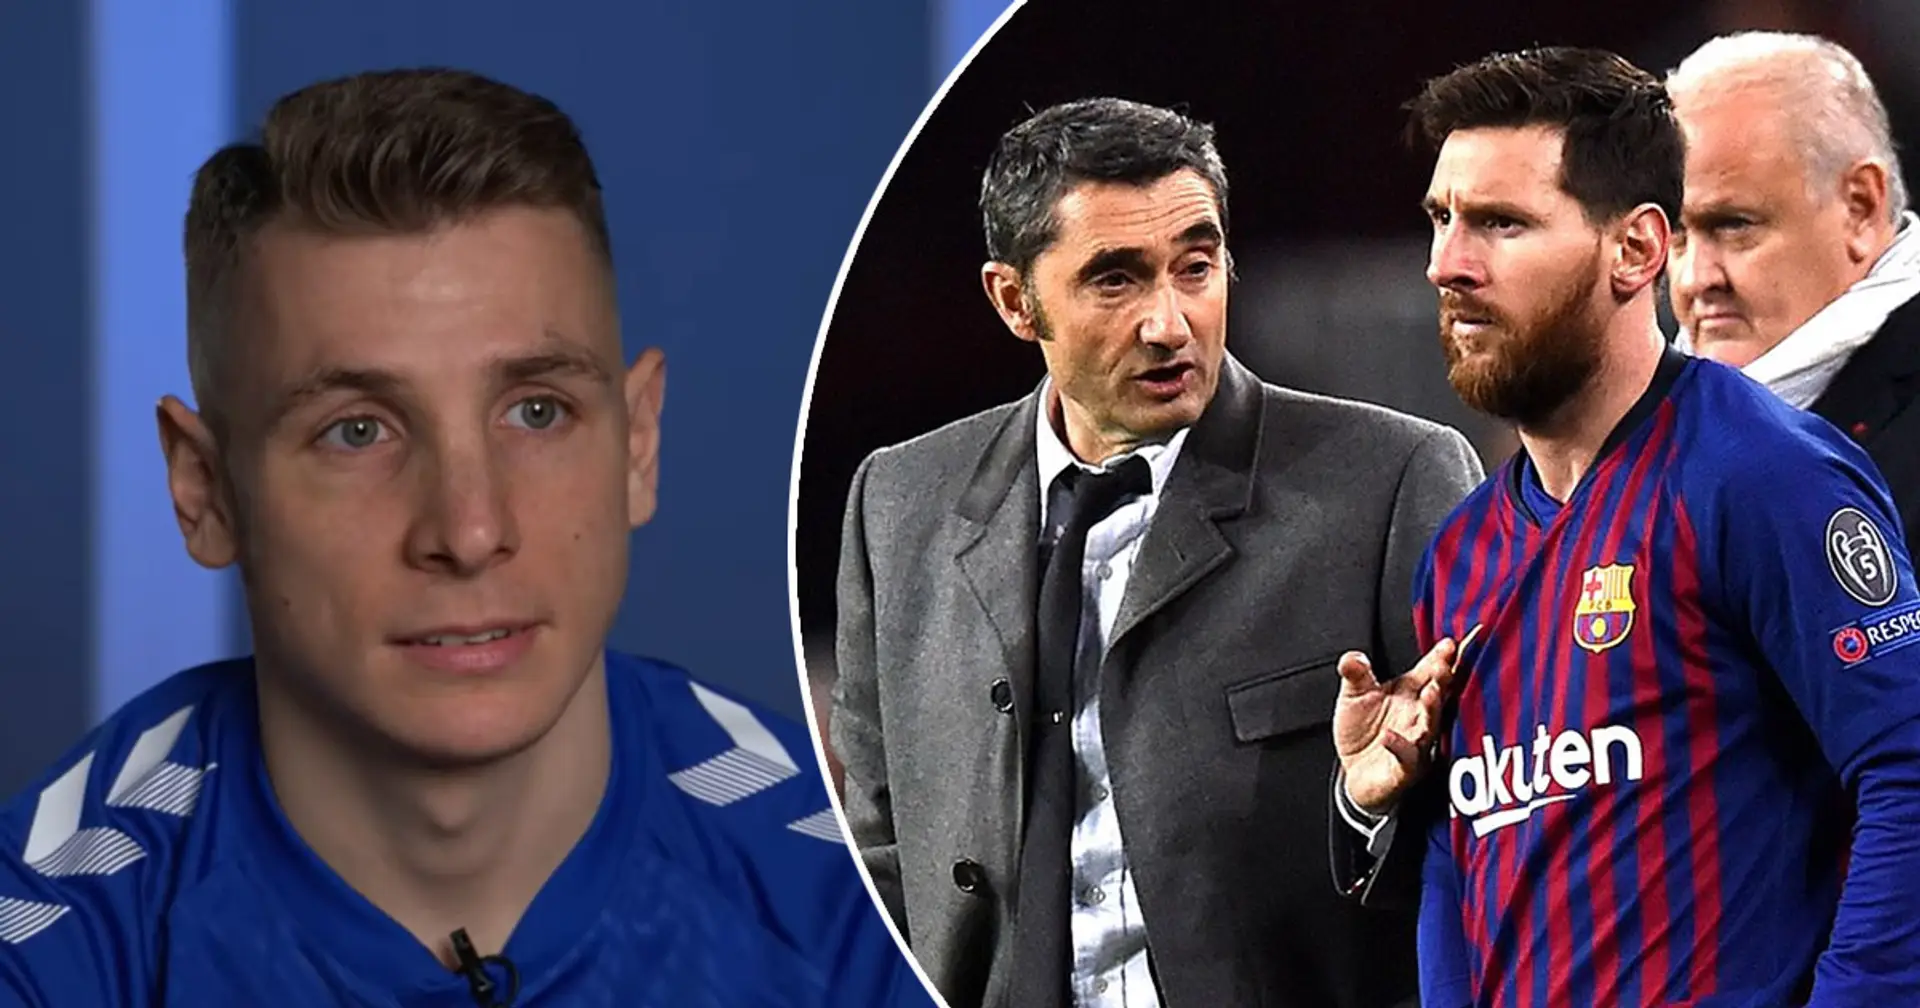 Lucas Digne claims Valverde 'had a hard time talking to Messi' as he compares him to Luis Enrique